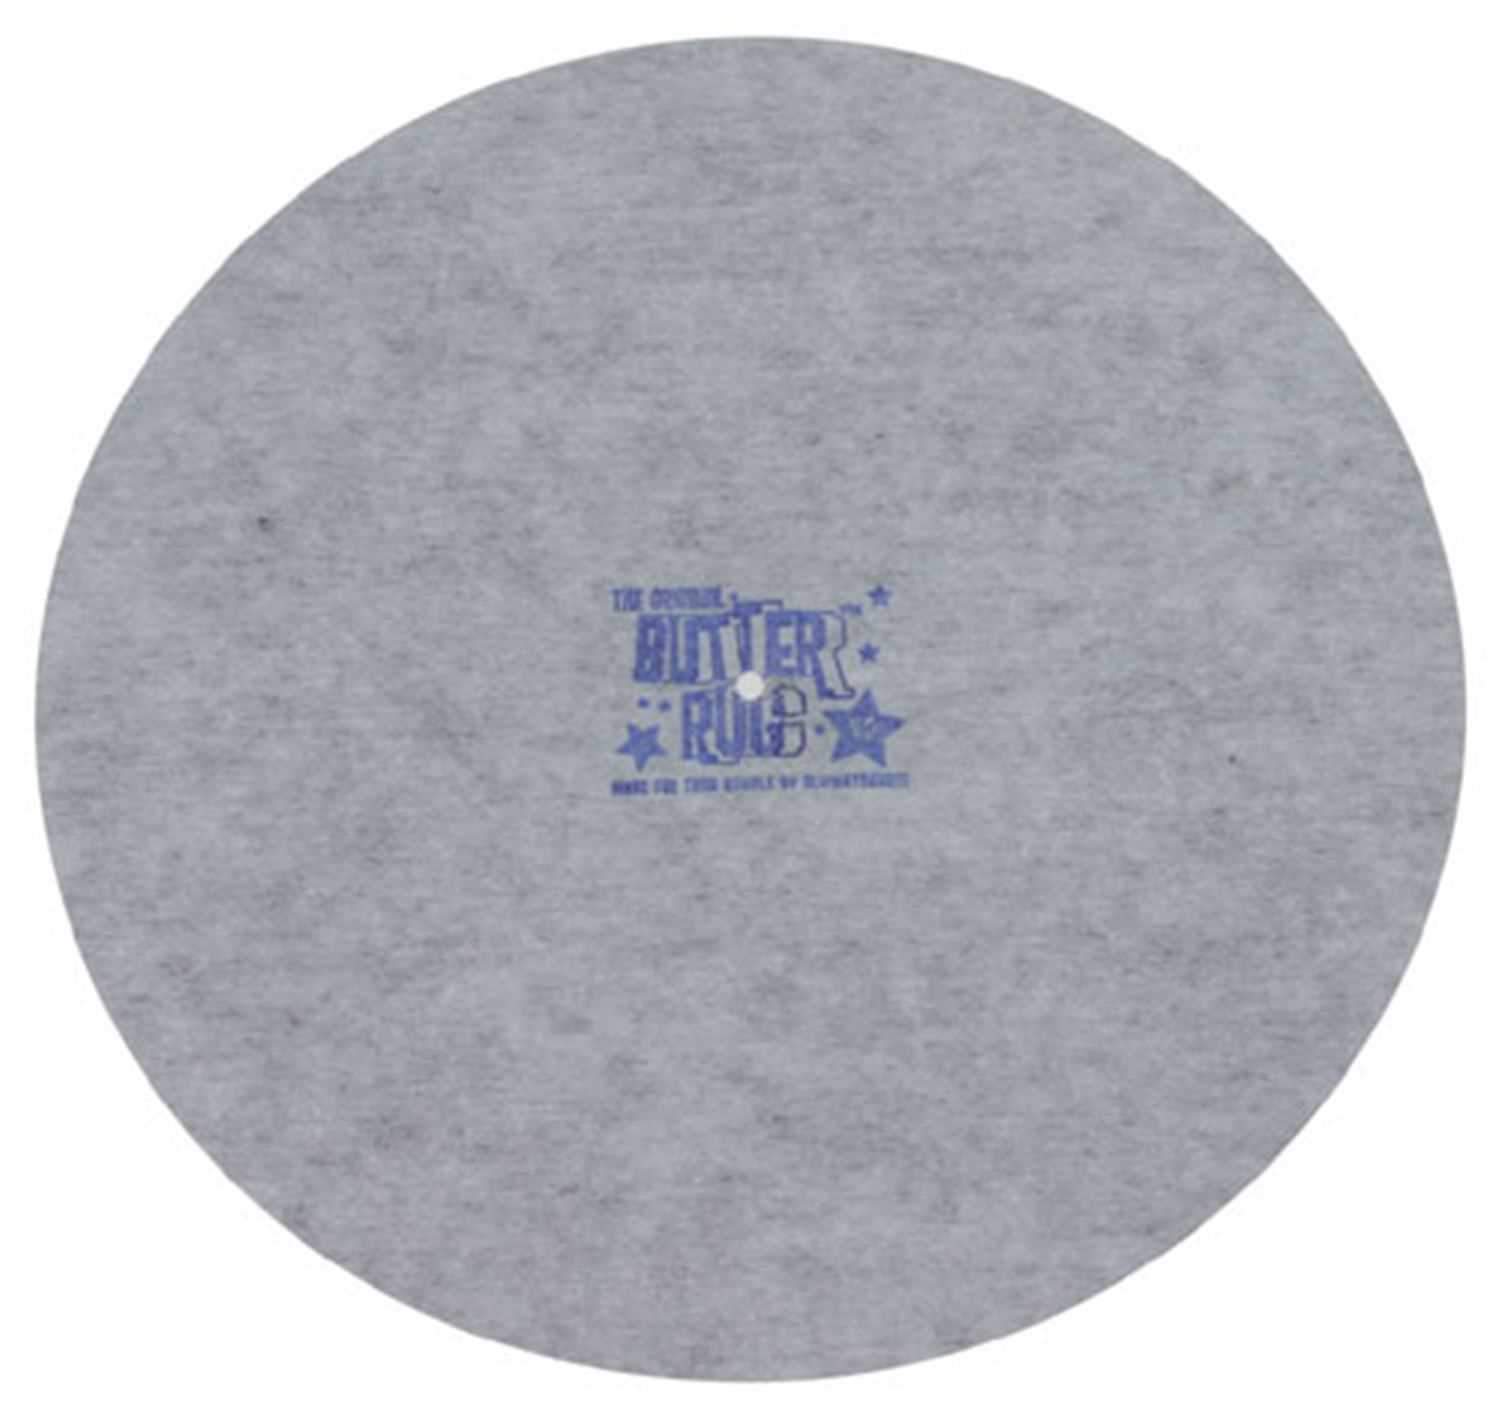 Thud Rumble Butter Rug Slipmats - Pair - ProSound and Stage Lighting